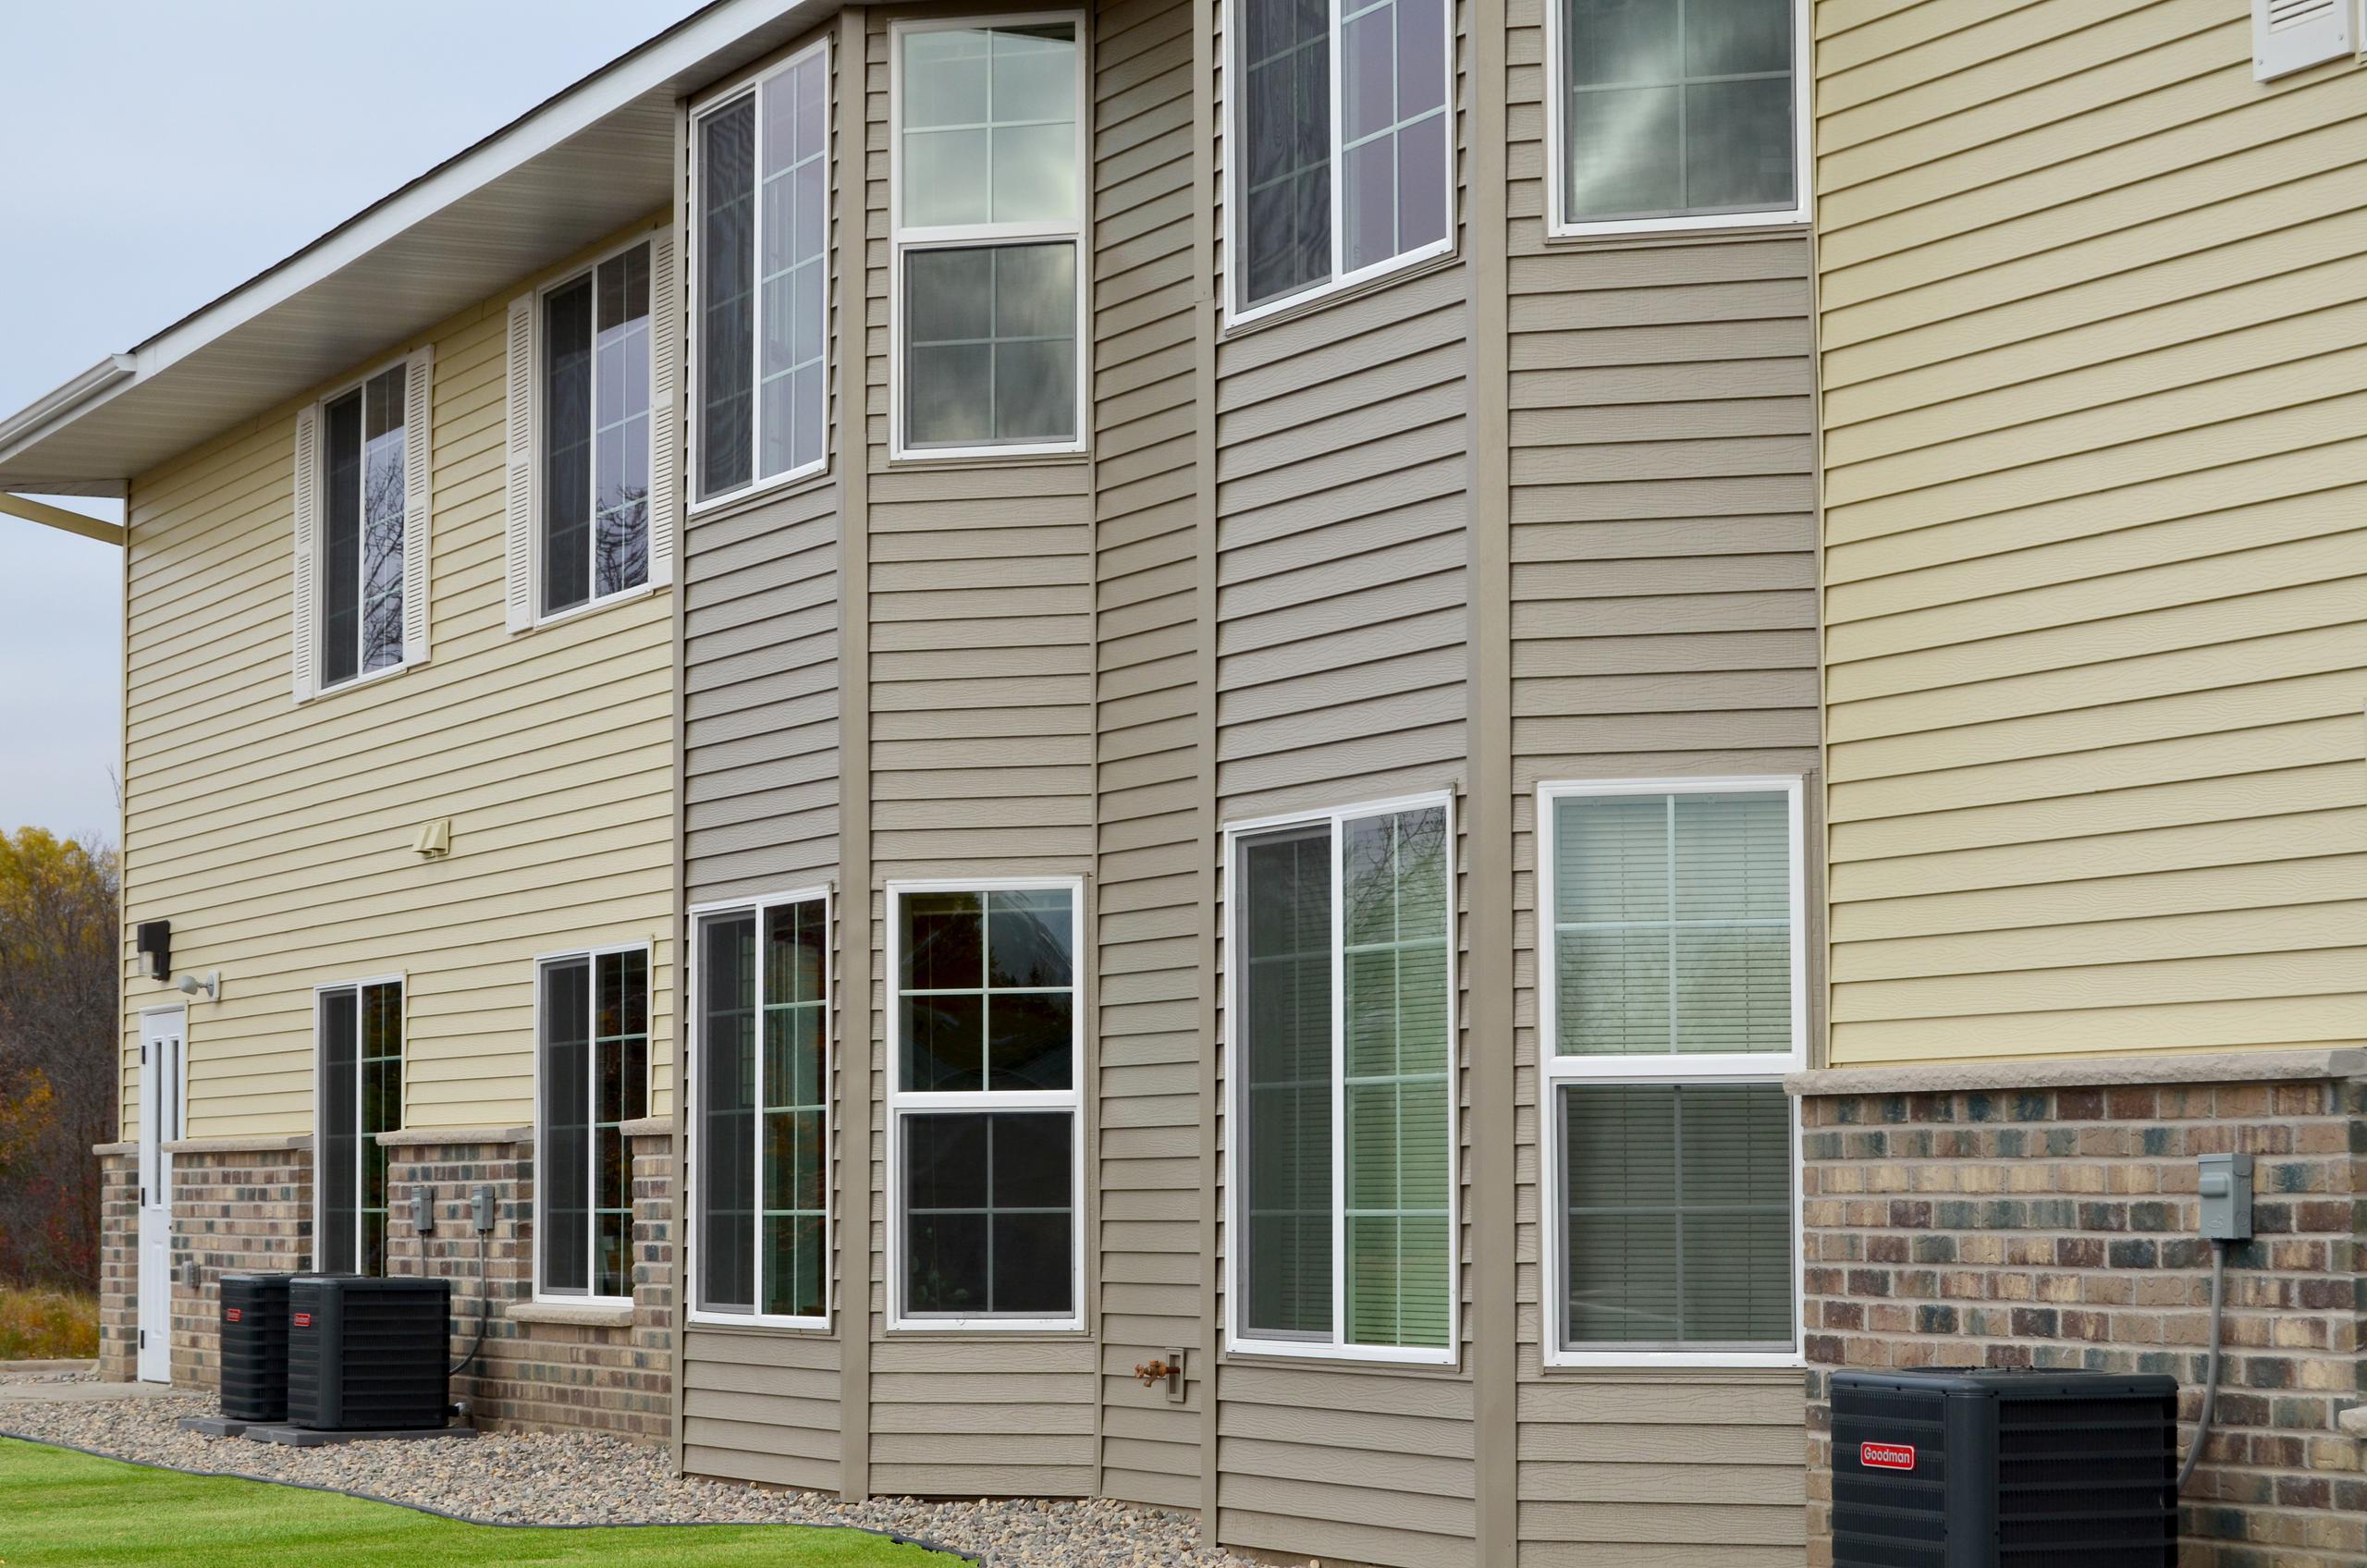 Two complimentary siding colors were installed at an apartment building in Minnesota to give it a distinctive look.